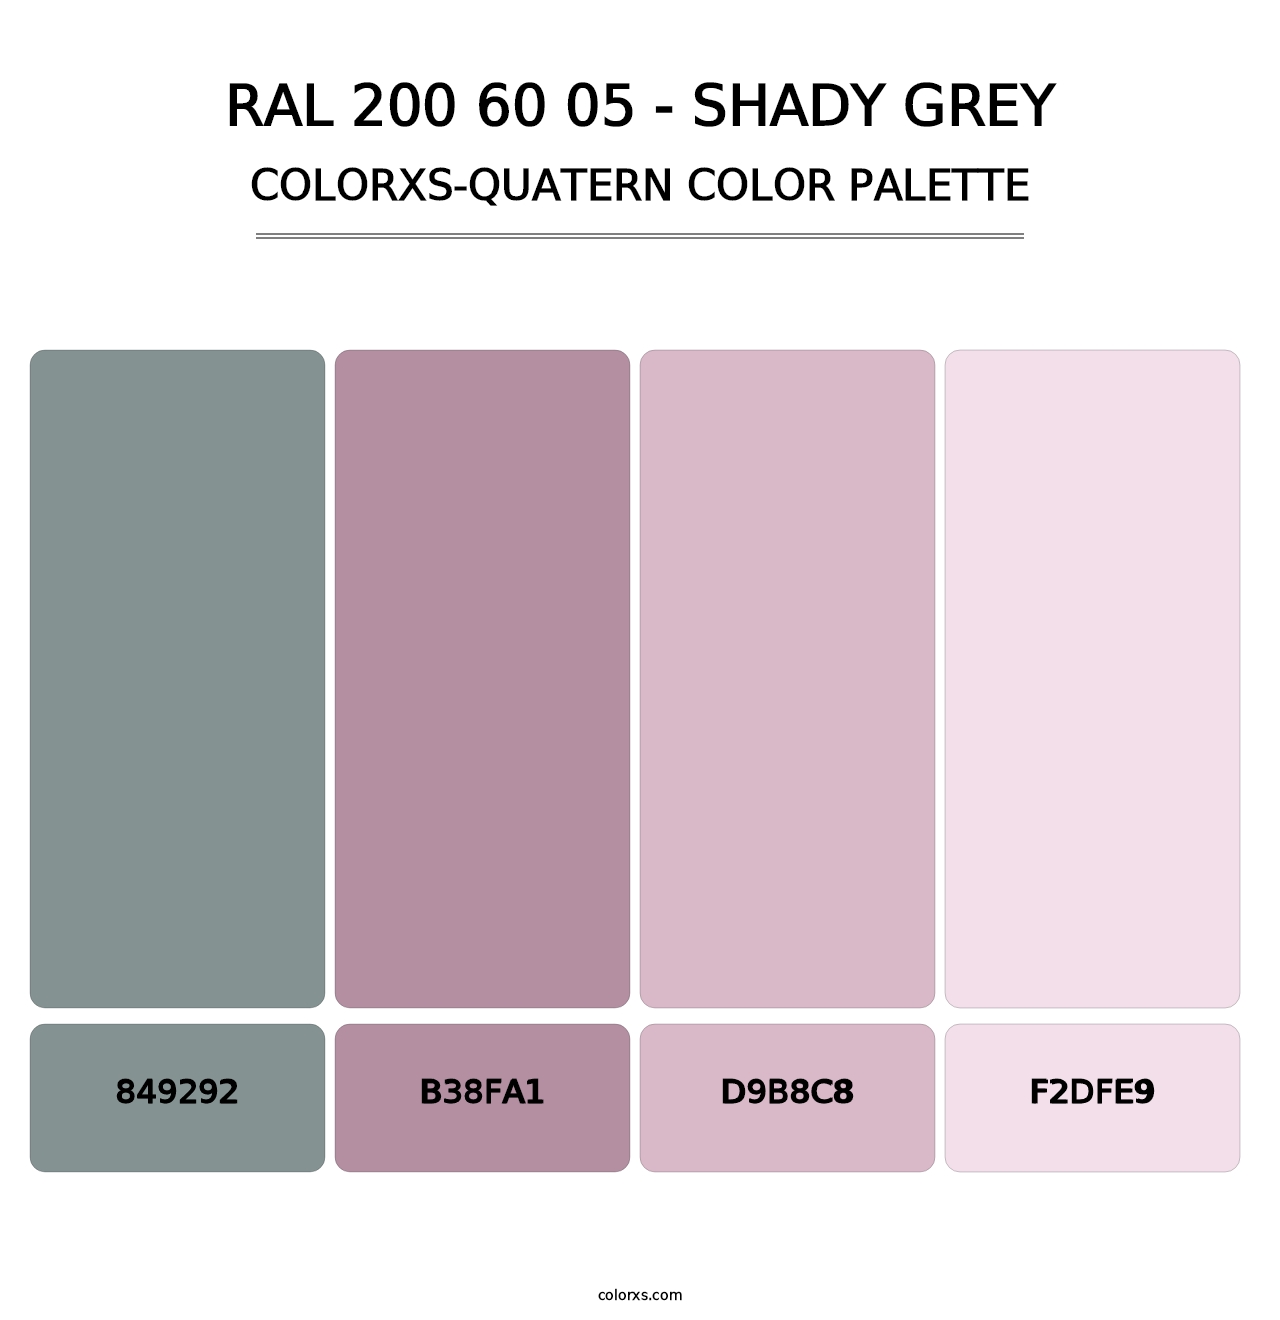 RAL 200 60 05 - Shady Grey - Colorxs Quatern Palette